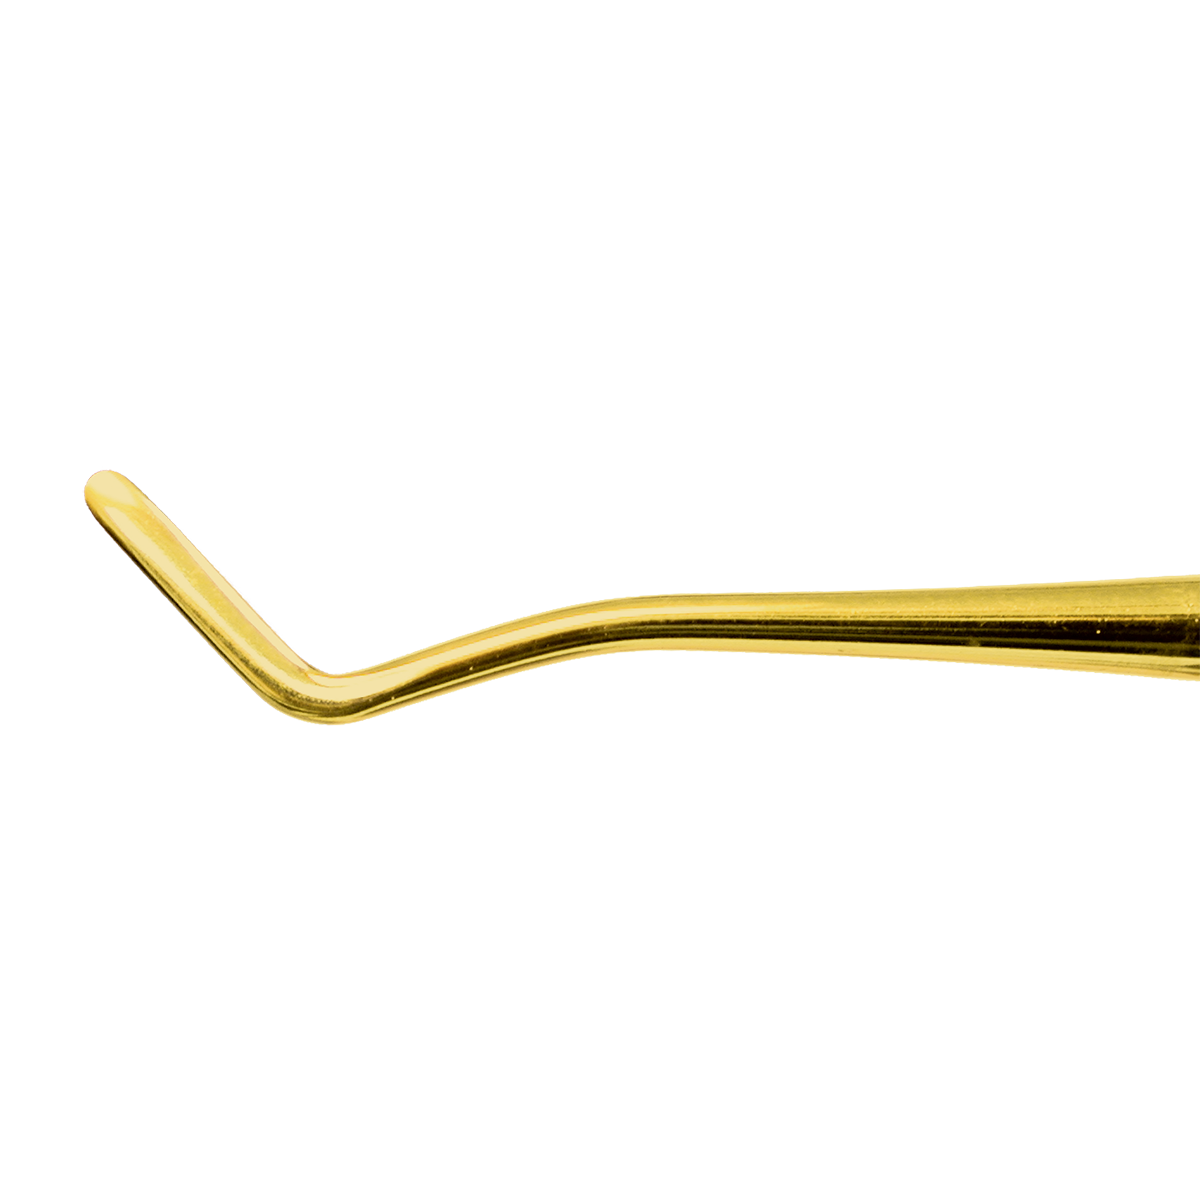 Side A: Paddle Tip